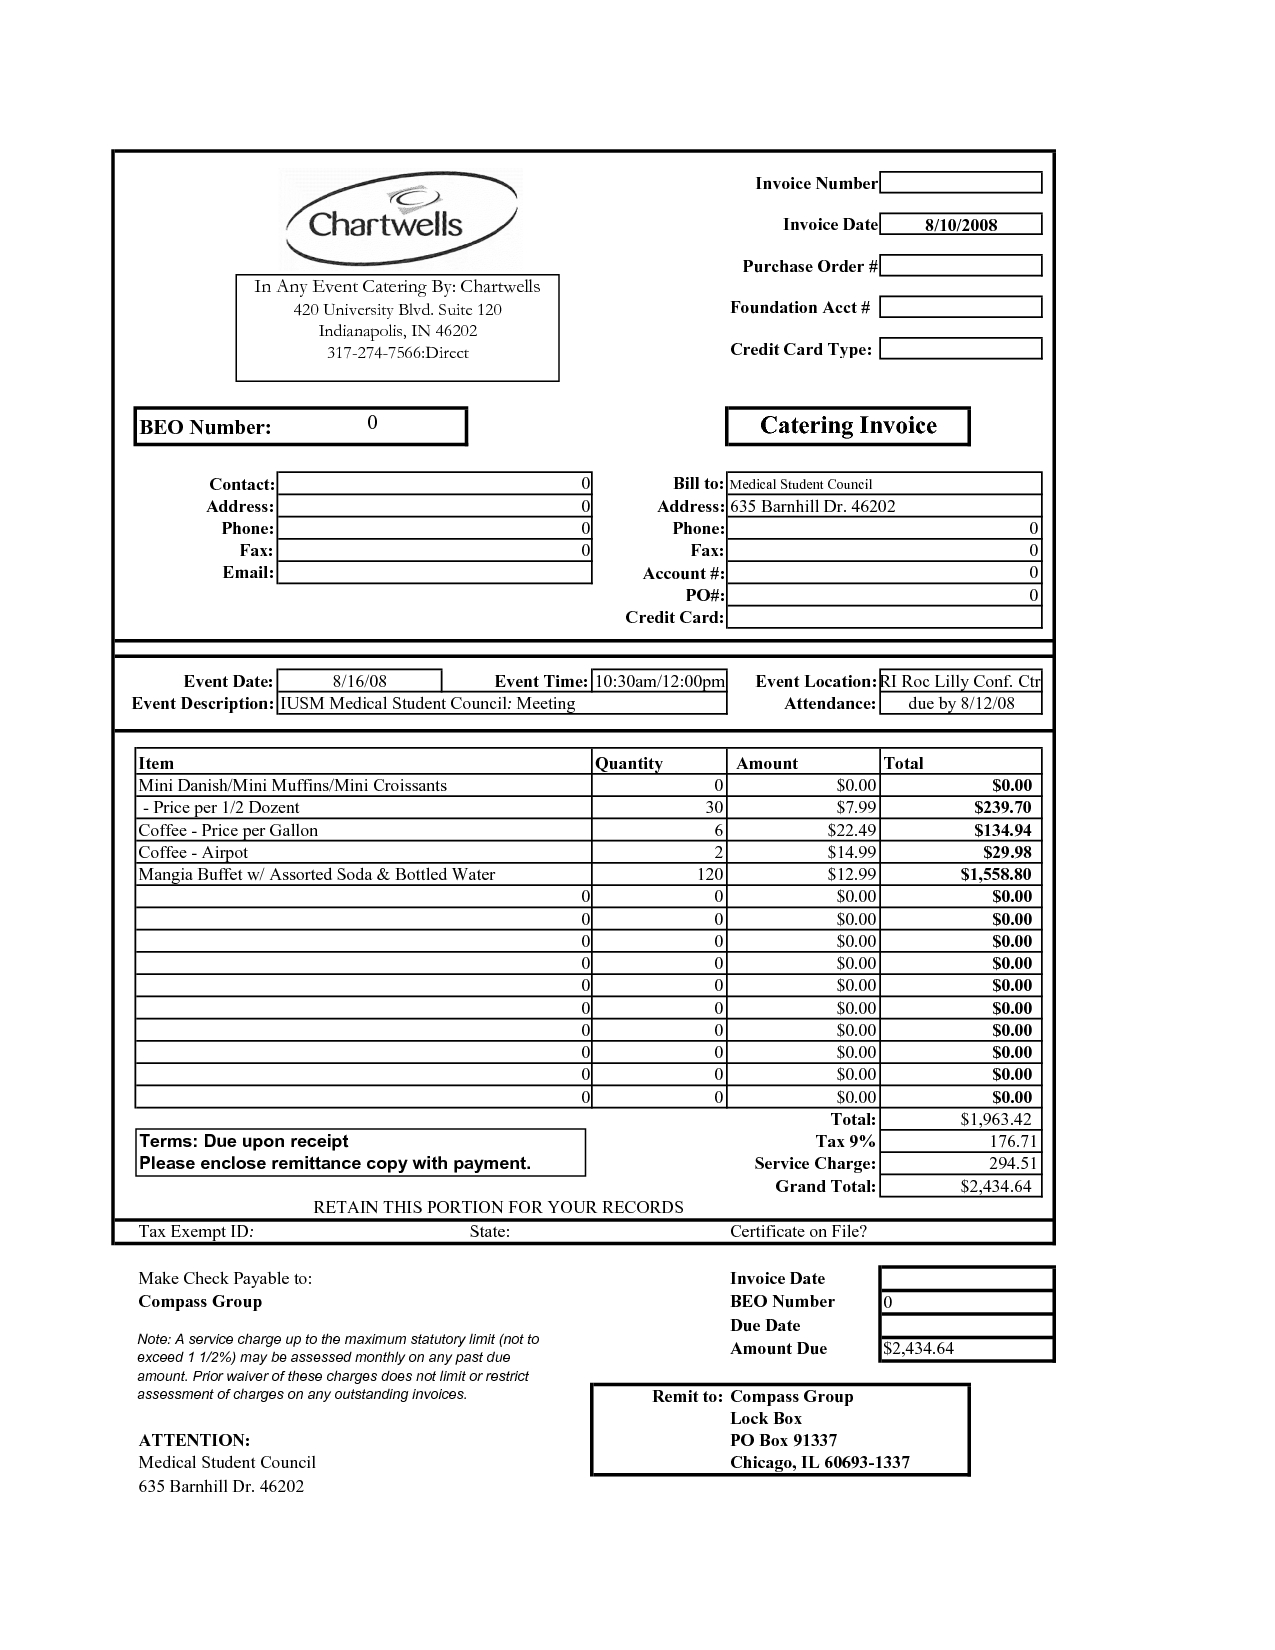 sample invoices for catering services